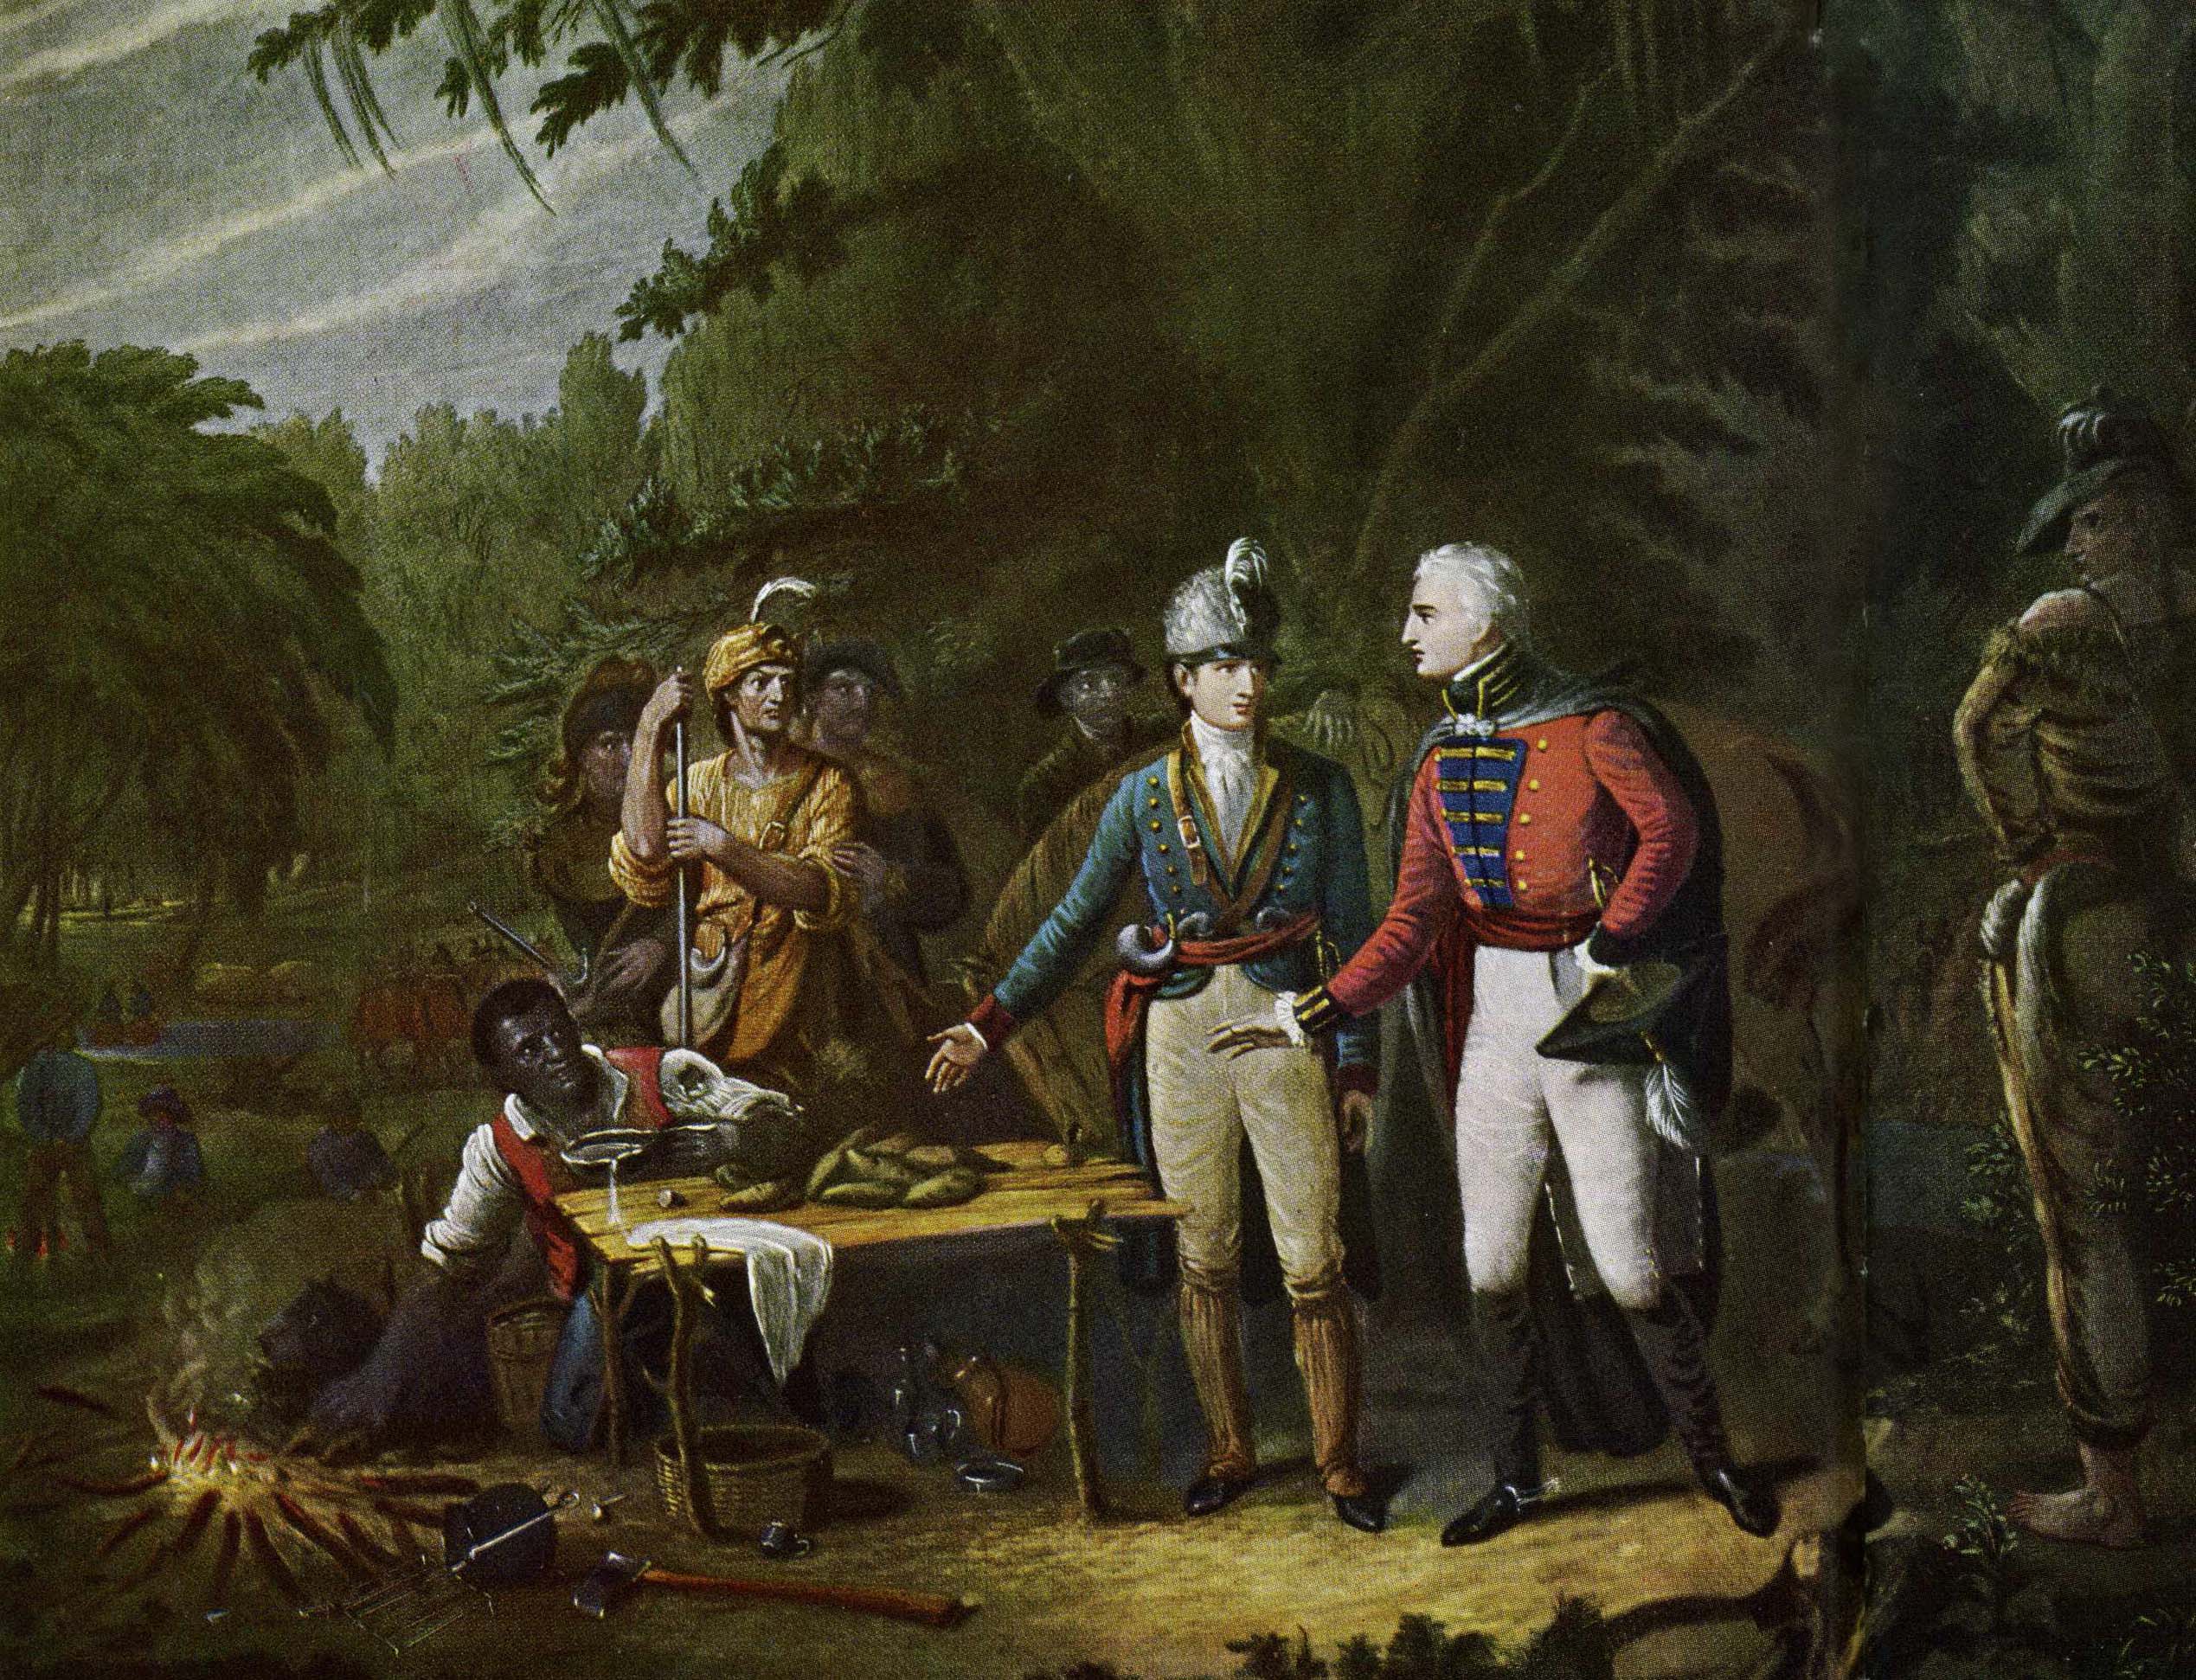  In John Blake White’s famous painting, Marion offers a British officer a meal of baked potatoes. Legend says that White had sat on Marion’s knee as a child and remembered his features. The painting was reproduced on Confederate currency. Painting courtesy of Life (Harry Shaw Newman, The Old Print Shop) 